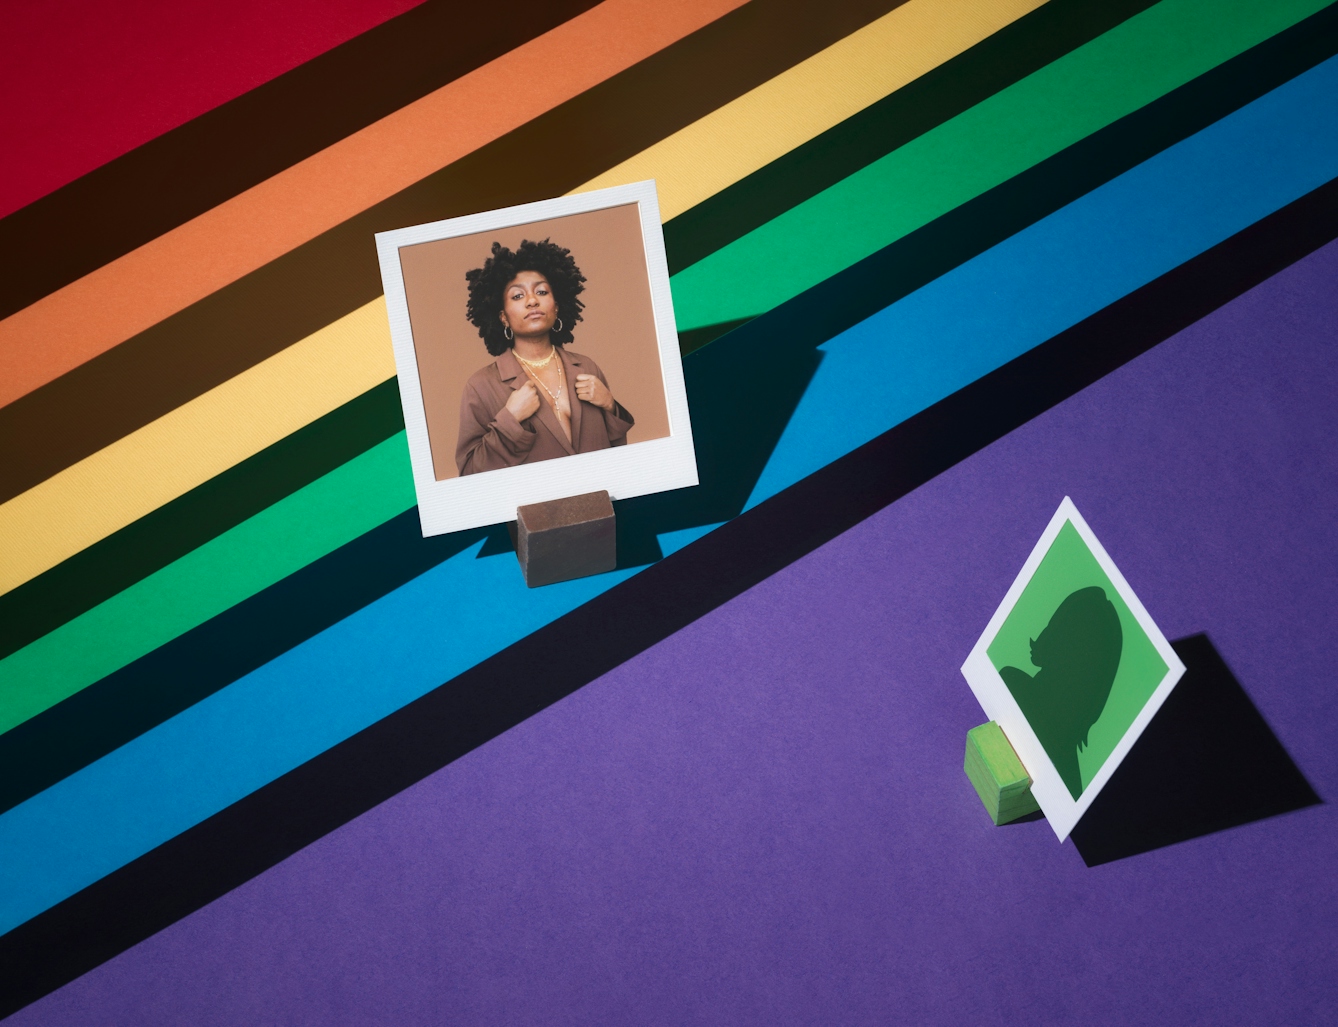 Photograph of a tiered set made up of the LGBTQ+ colours of red, orange, yellow, green, blue and purple.  The tiers form a diagonal line.  On the first tier, the blue one, the portrait of a woman against a brown background is framed in a small white frame.  Below this image to the right, an anonymous figure on a green background is facing towards her.